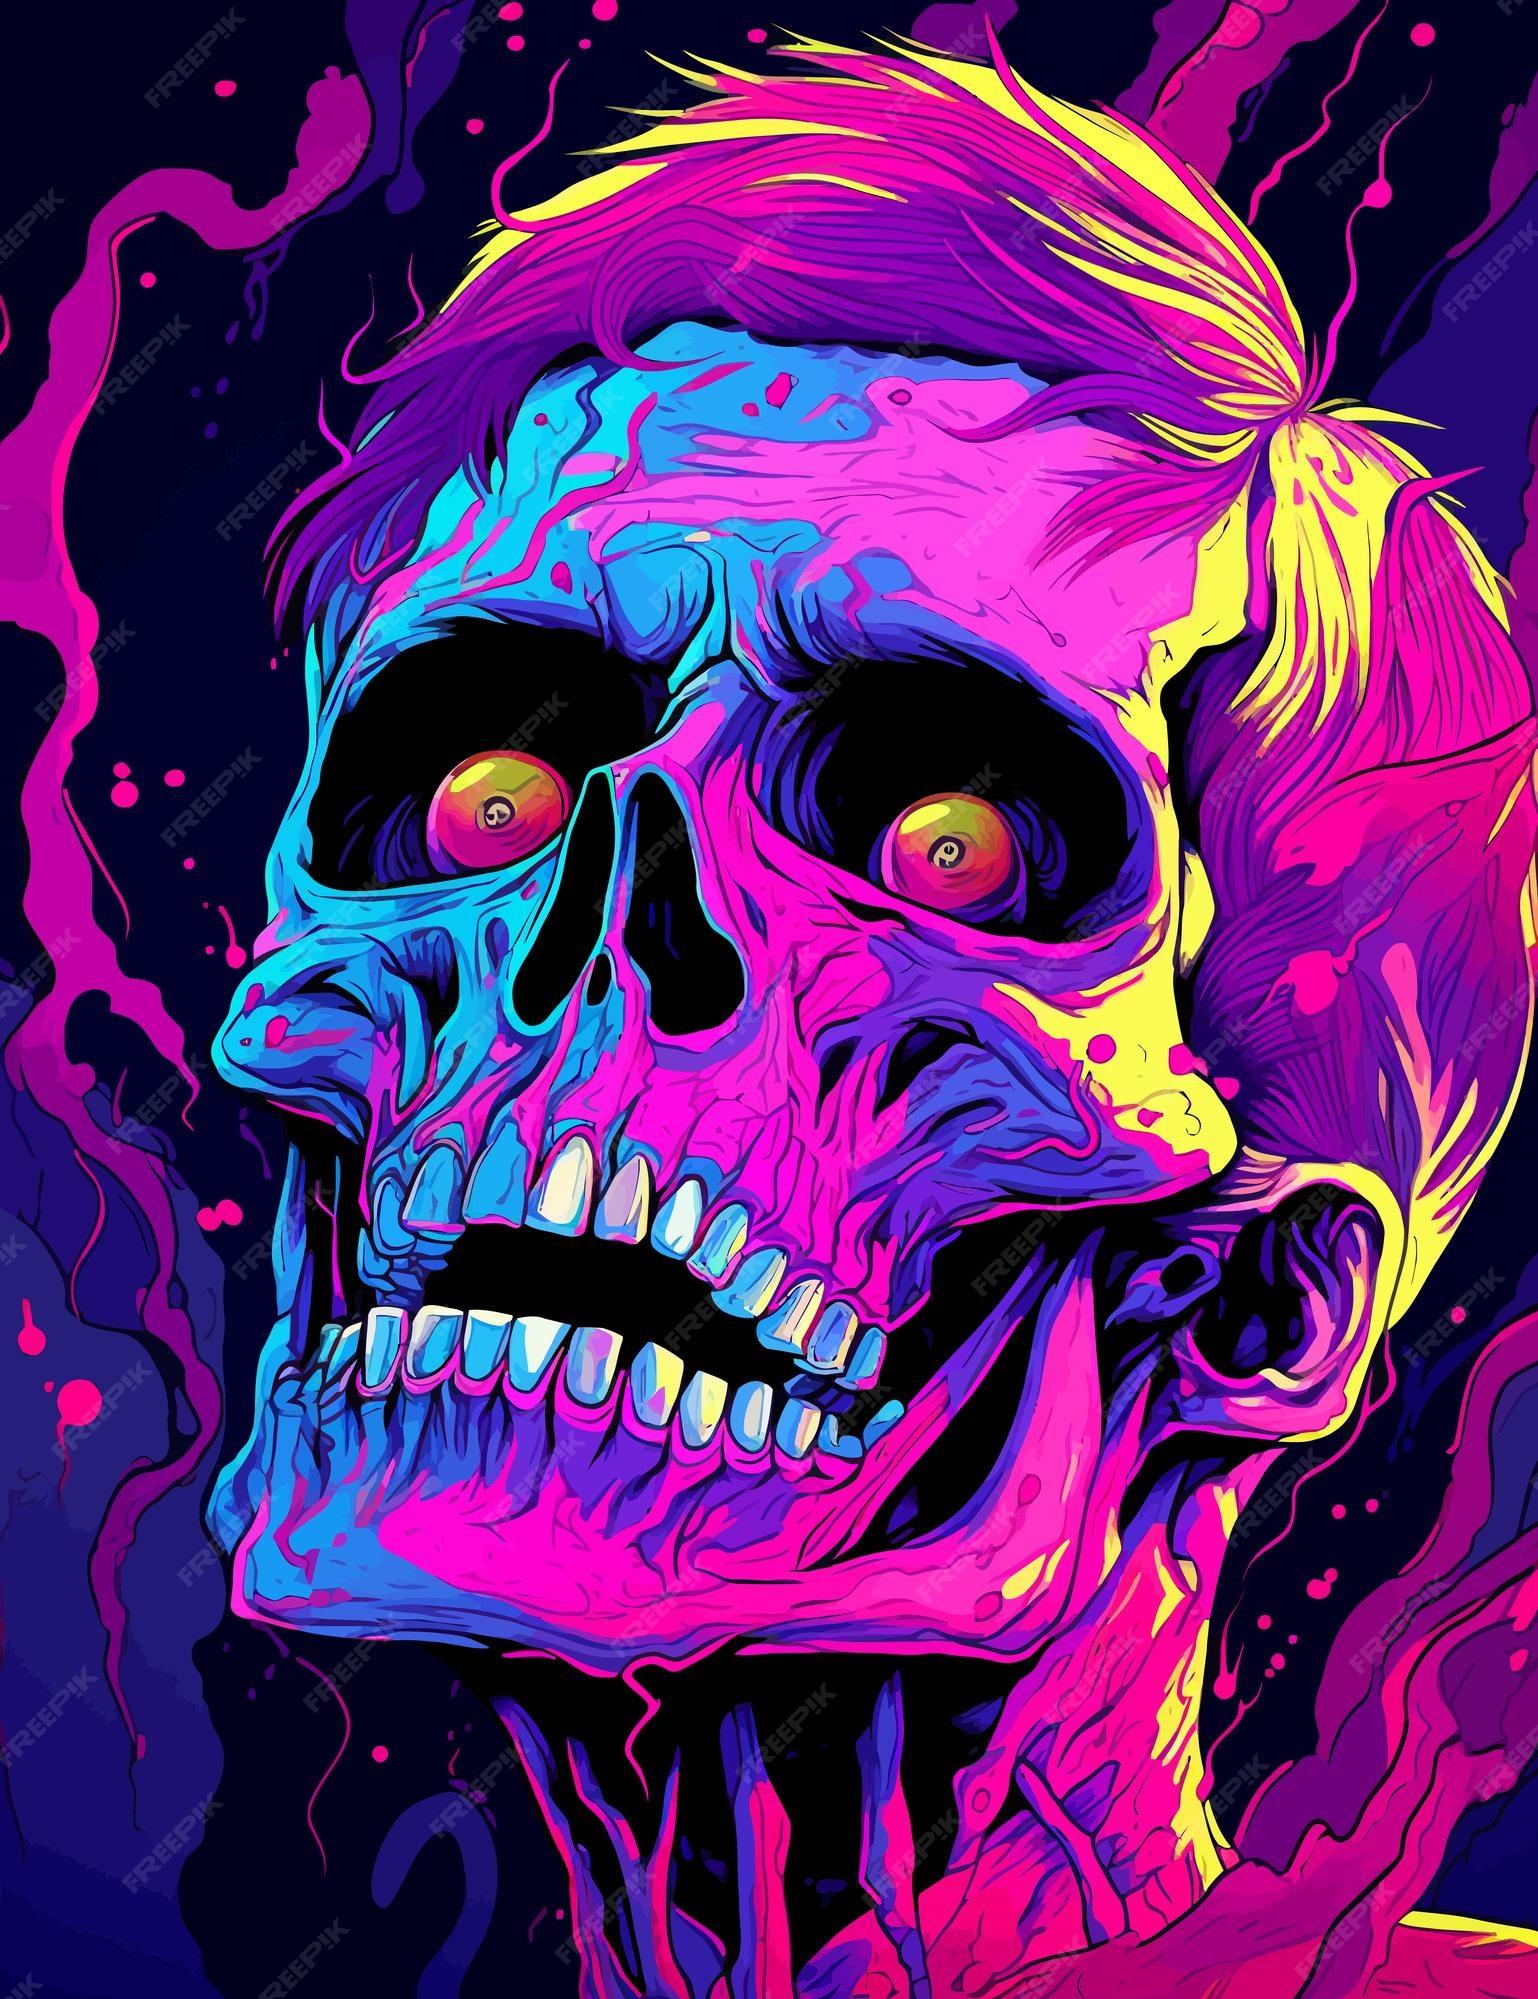 Premium Vector A Poster Of Skull With Yellow Eyes And Purple